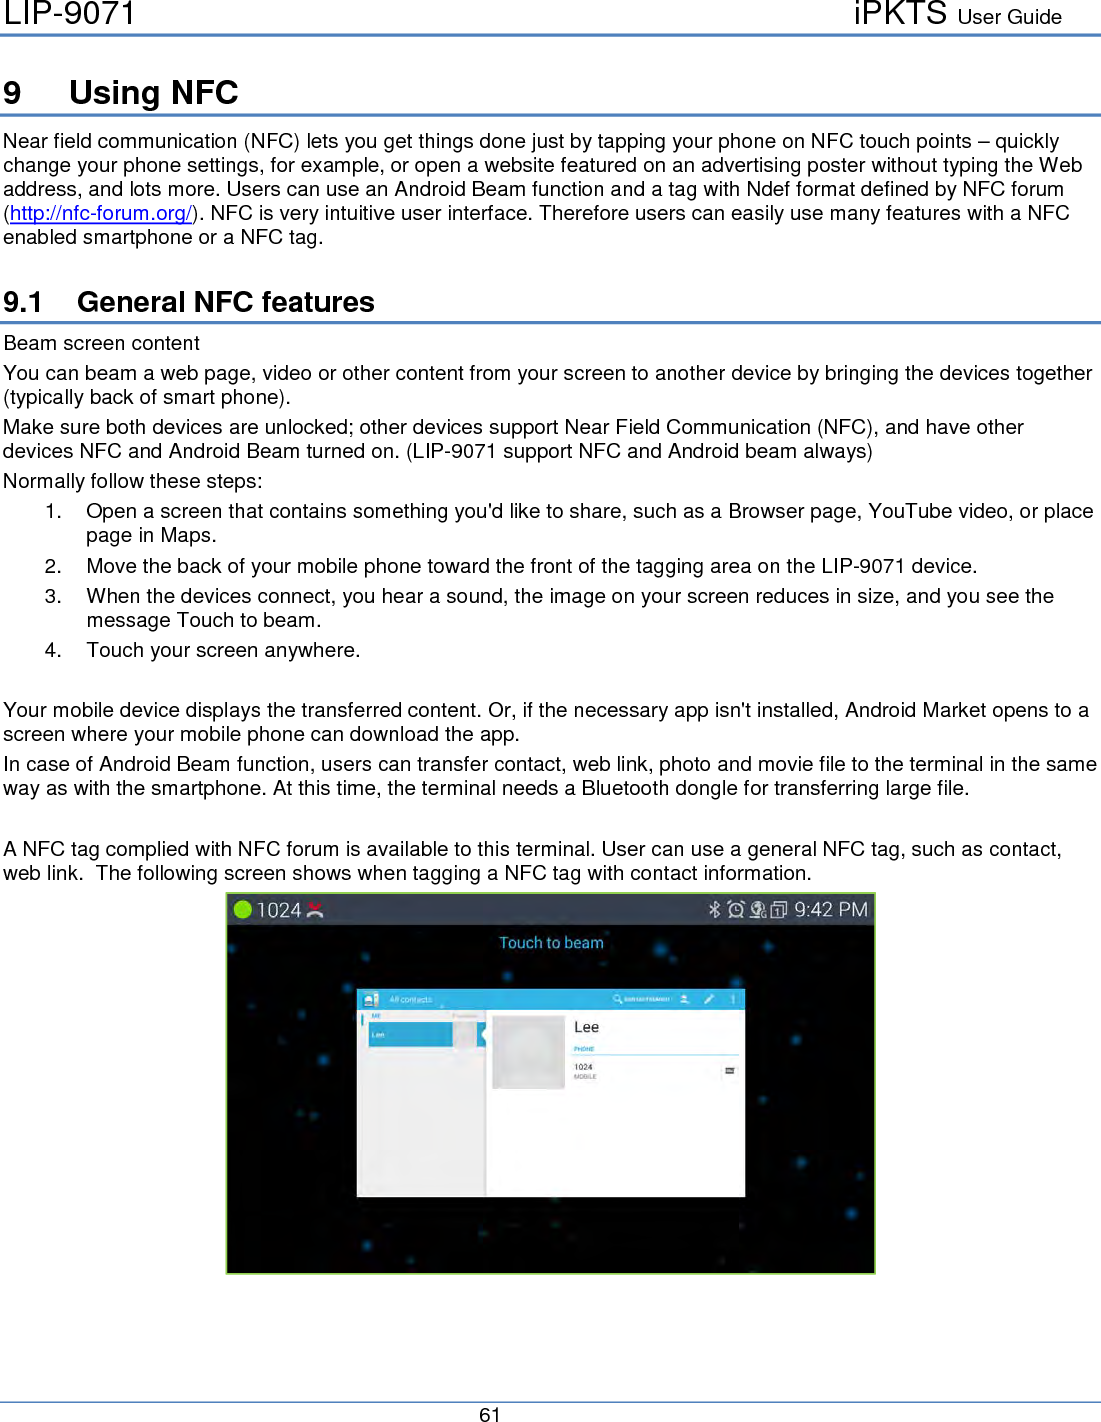 LIP-9071     iPKTS User Guide      61   9  Using NFC Near field communication (NFC) lets you get things done just by tapping your phone on NFC touch points – quickly change your phone settings, for example, or open a website featured on an advertising poster without typing the Web address, and lots more. Users can use an Android Beam function and a tag with Ndef format defined by NFC forum (http://nfc-forum.org/). NFC is very intuitive user interface. Therefore users can easily use many features with a NFC enabled smartphone or a NFC tag.  9.1 General NFC features Beam screen content You can beam a web page, video or other content from your screen to another device by bringing the devices together (typically back of smart phone). Make sure both devices are unlocked; other devices support Near Field Communication (NFC), and have other devices NFC and Android Beam turned on. (LIP-9071 support NFC and Android beam always) Normally follow these steps: 1. Open a screen that contains something you&apos;d like to share, such as a Browser page, YouTube video, or place page in Maps. 2. Move the back of your mobile phone toward the front of the tagging area on the LIP-9071 device. 3. When the devices connect, you hear a sound, the image on your screen reduces in size, and you see the message Touch to beam. 4. Touch your screen anywhere.  Your mobile device displays the transferred content. Or, if the necessary app isn&apos;t installed, Android Market opens to a screen where your mobile phone can download the app. In case of Android Beam function, users can transfer contact, web link, photo and movie file to the terminal in the same way as with the smartphone. At this time, the terminal needs a Bluetooth dongle for transferring large file.  A NFC tag complied with NFC forum is available to this terminal. User can use a general NFC tag, such as contact, web link.  The following screen shows when tagging a NFC tag with contact information.   